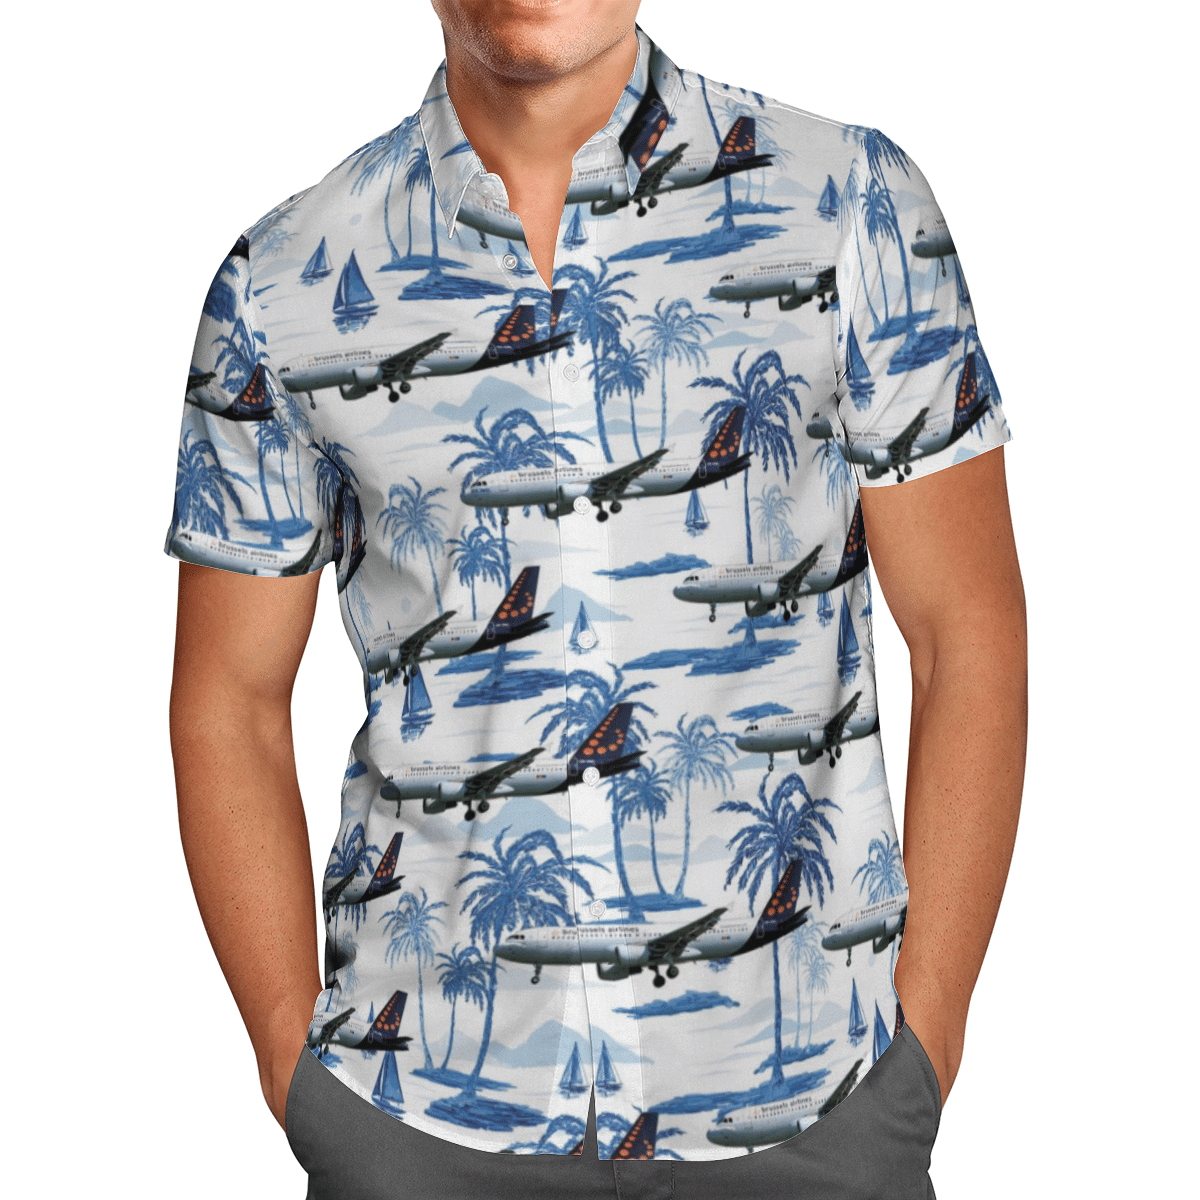 HOT Brussels Airlines Airbus A320-200 All Over Print Tropical Shirt1